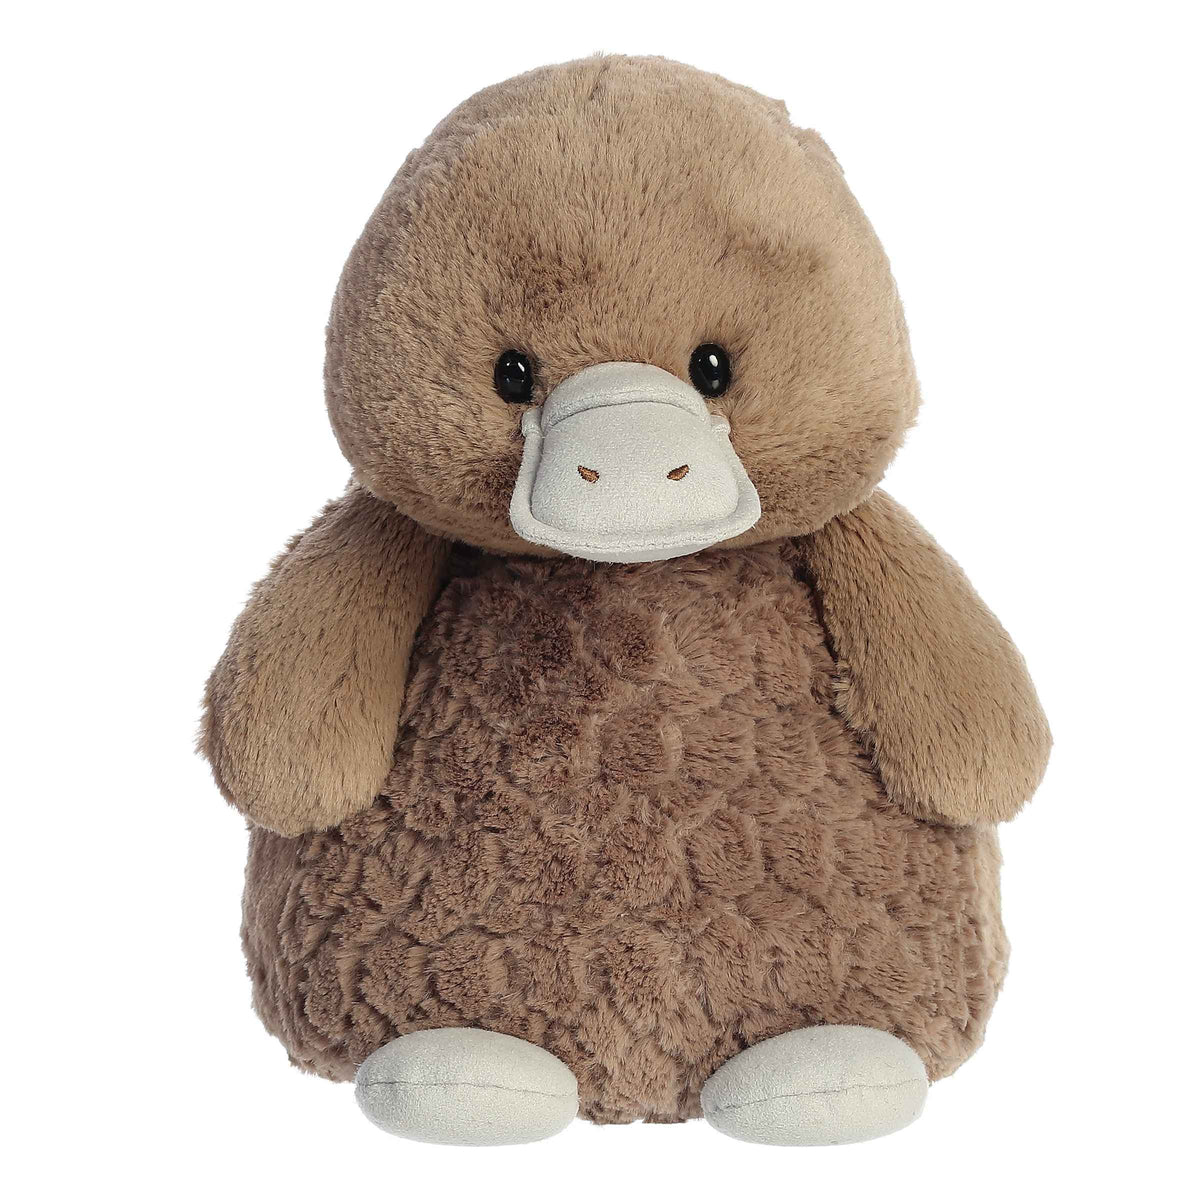 Peaceful Platypus plush, chocolate-brown from Huggle Pals, seated and cozy with a charming and tranquil demeanor